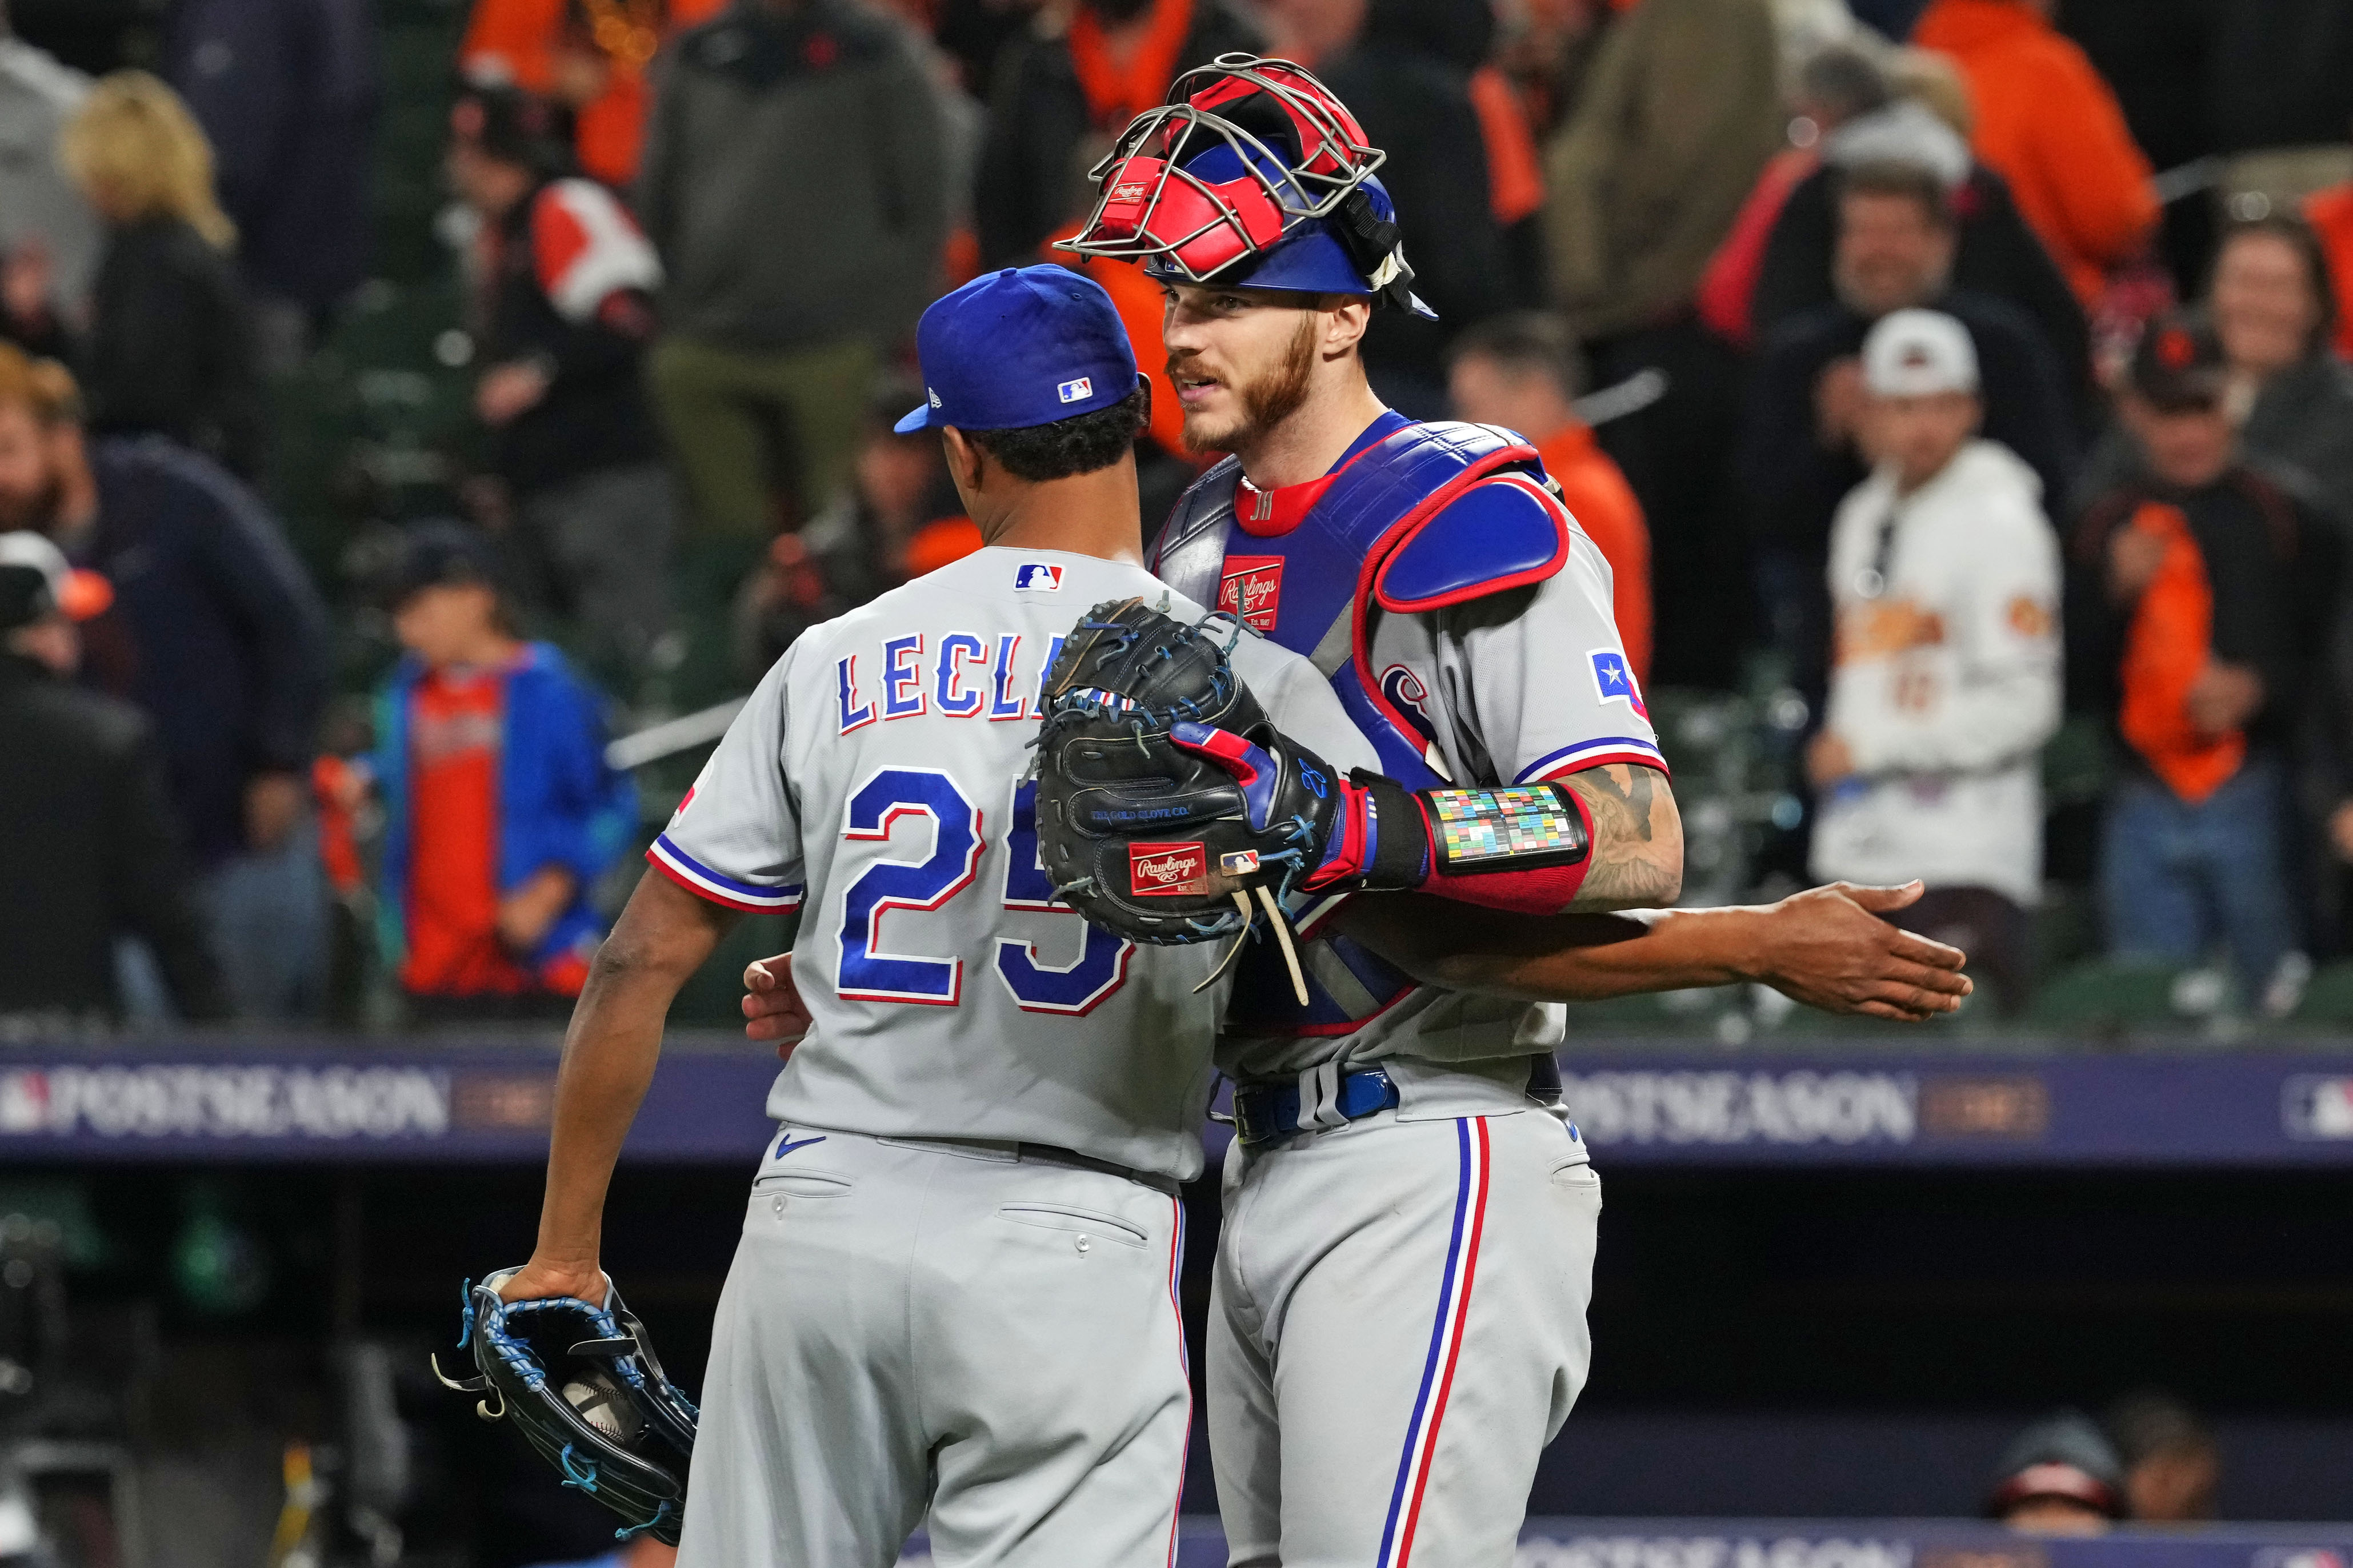 Texas Rangers reliever Jose Leclerc celebrates with catcher Jonah Heim after beating the Baltimore Orioles in Game 2 of the ALDS on Oct. 8 at Camden Yards.